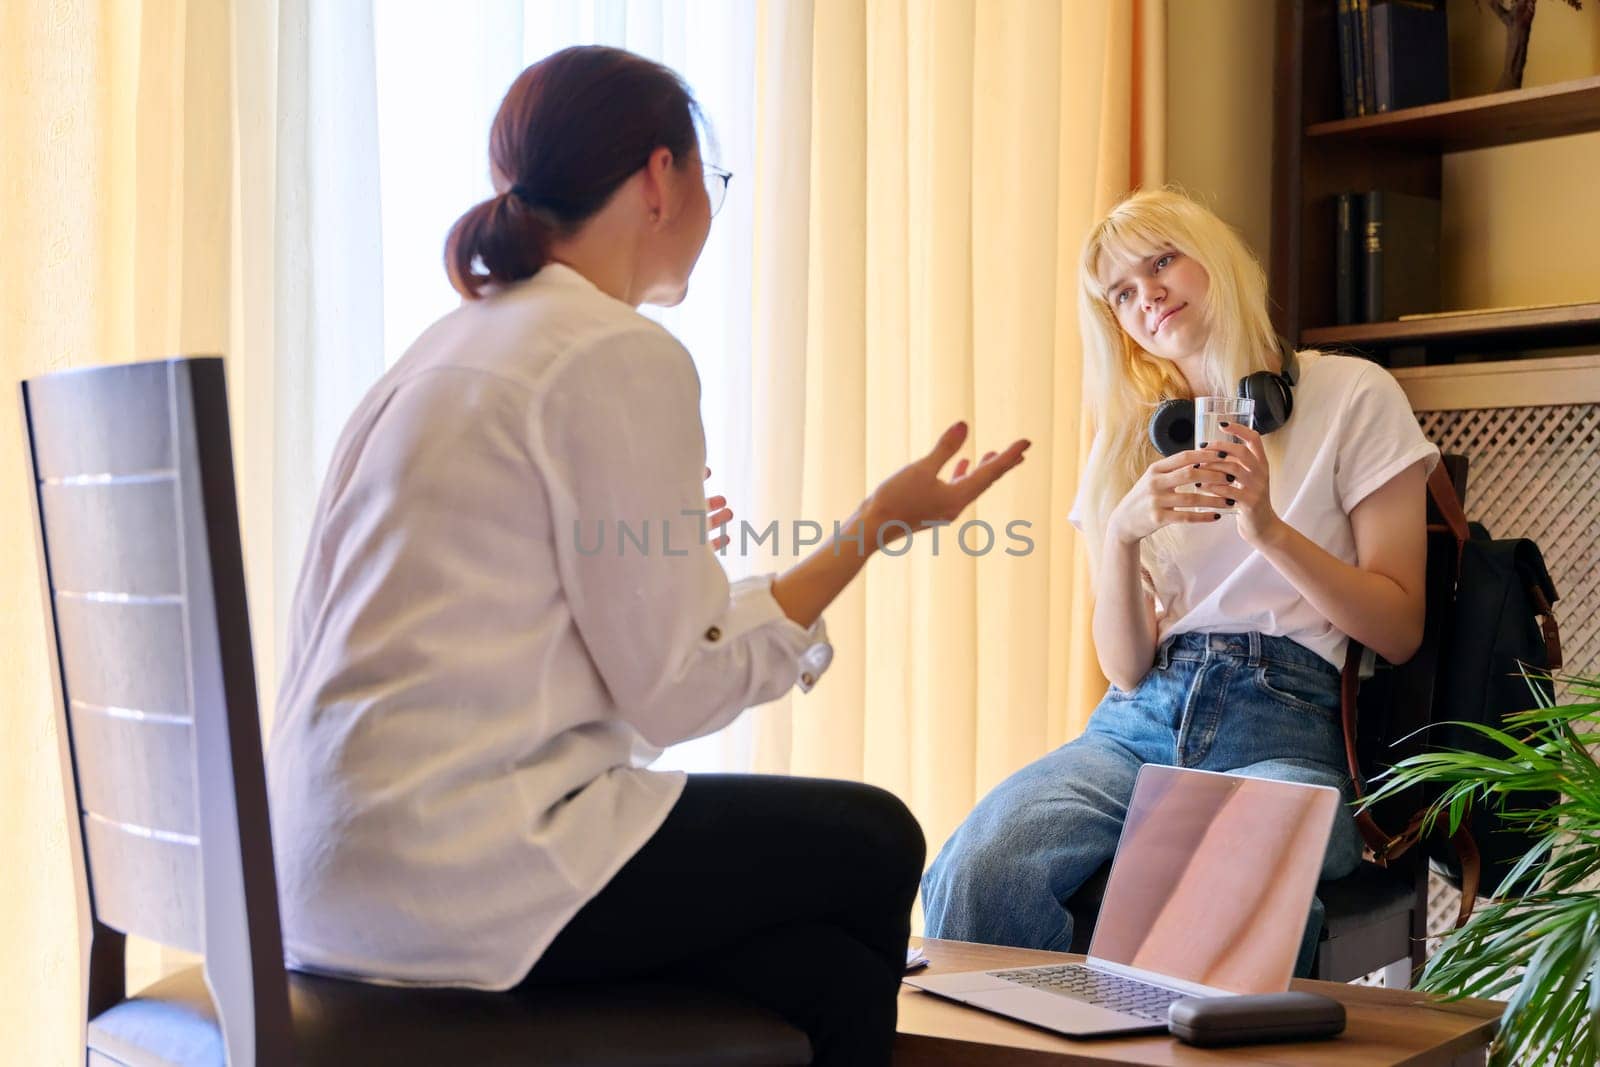 Therapy session of a teenage student girl, professional help of a psychologist. Psychology, adolescence, issue, treatment, adolescent mental health, counseling, social assistance concept